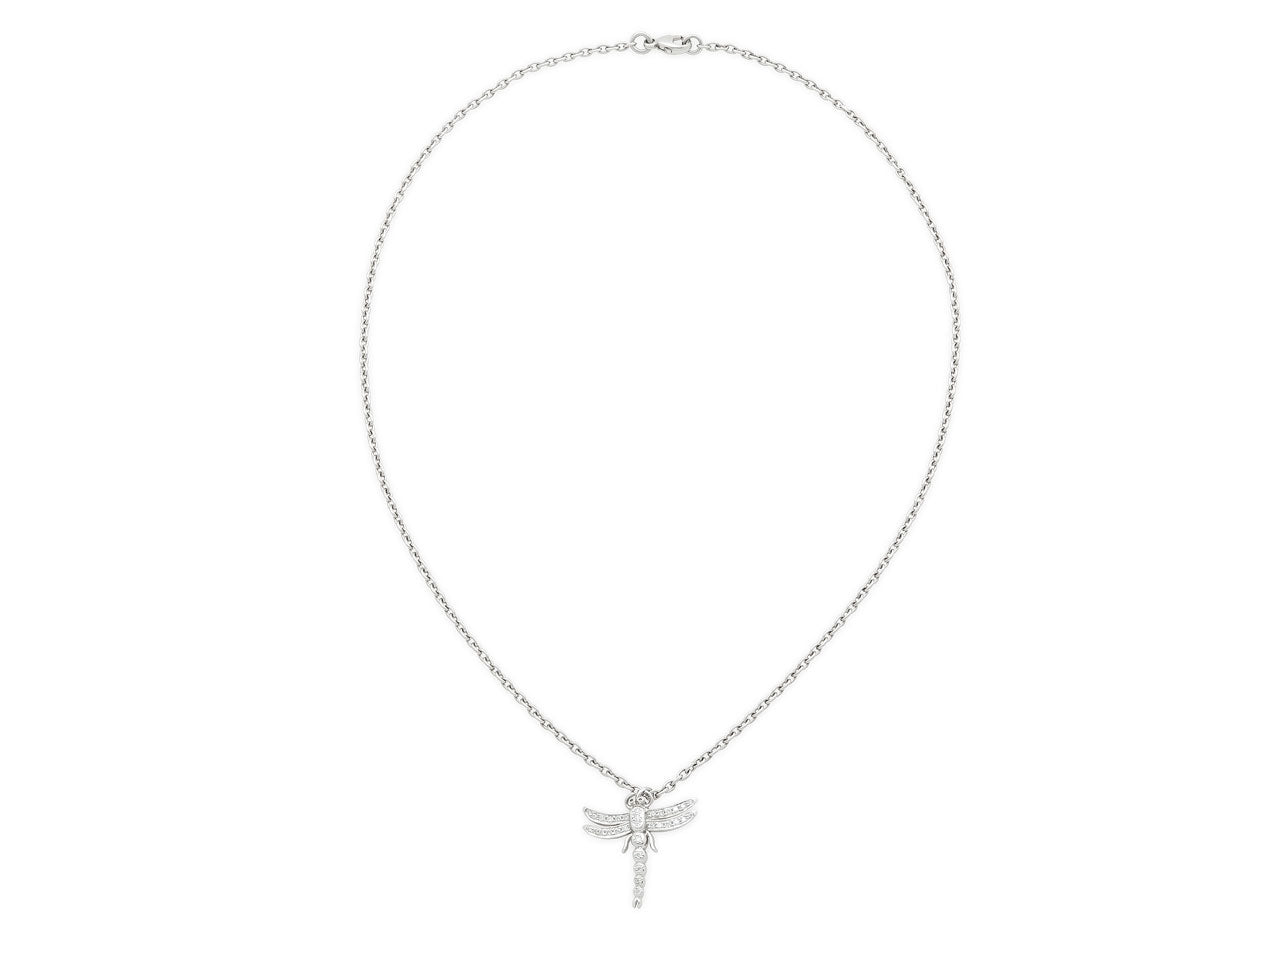 Tiffany & Co. Diamond Dragonfly Necklace in Platinum